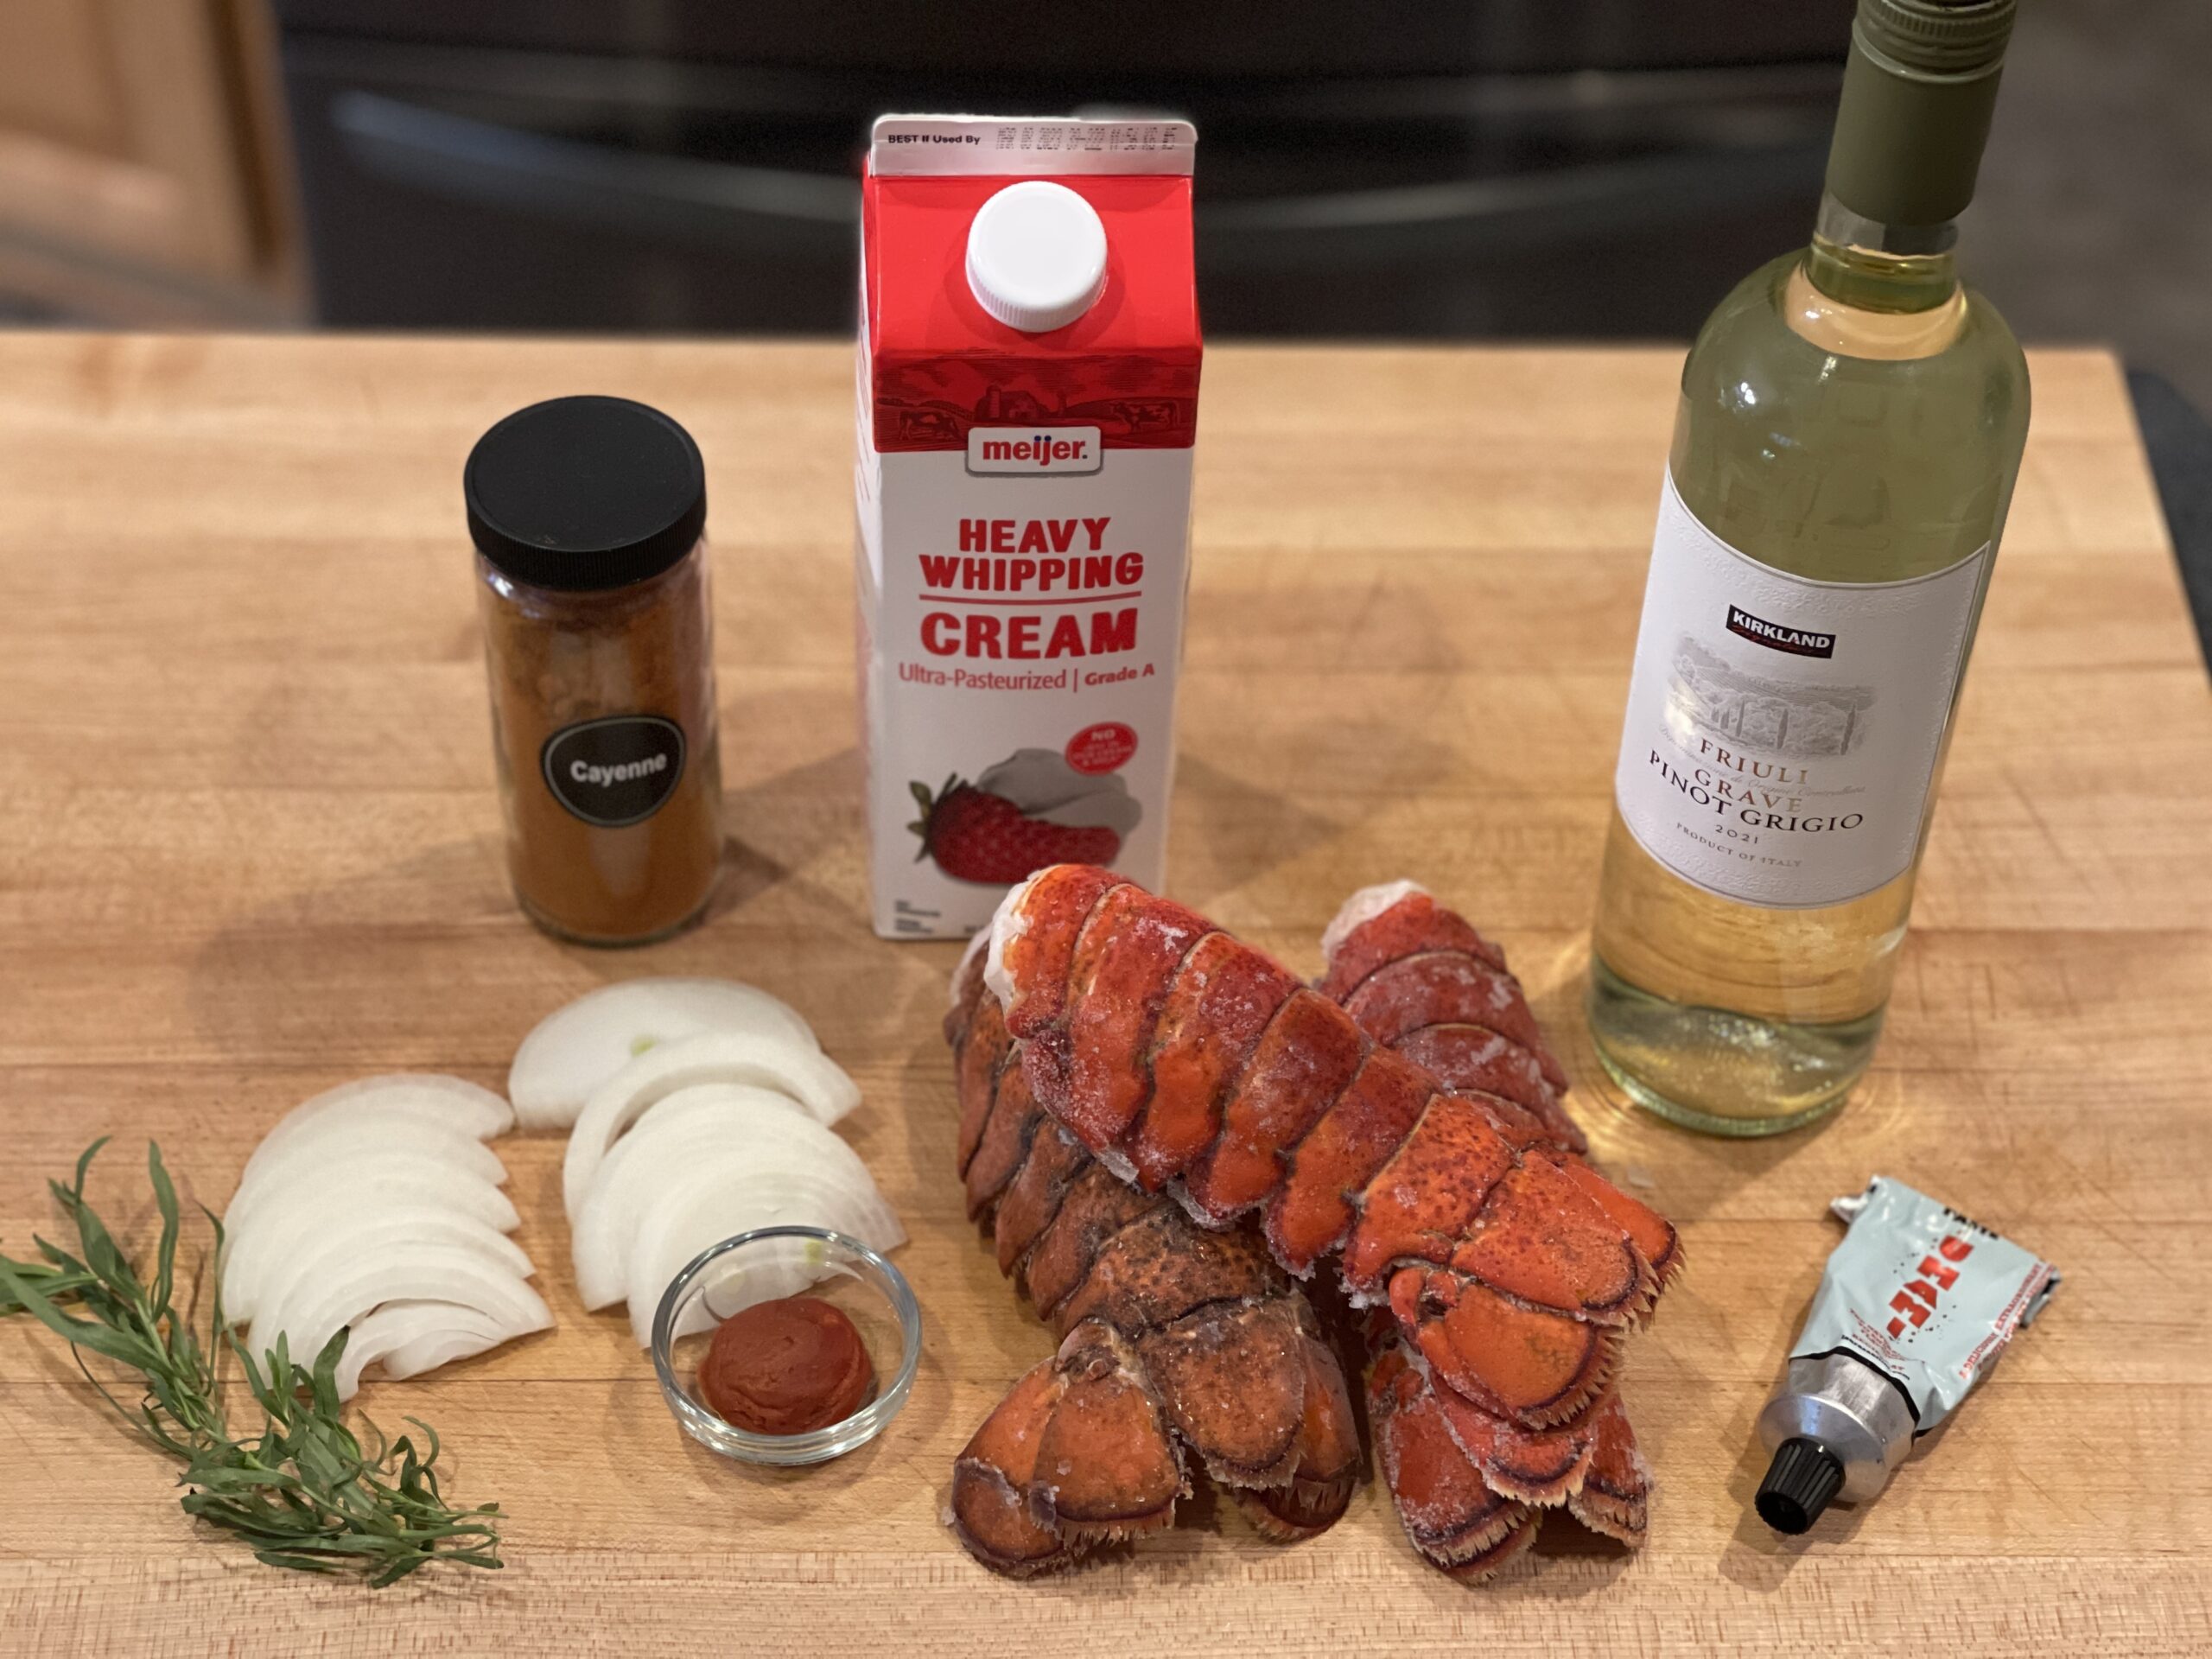 Instant Pot Lobster Bisque, The Foodie and The Fix